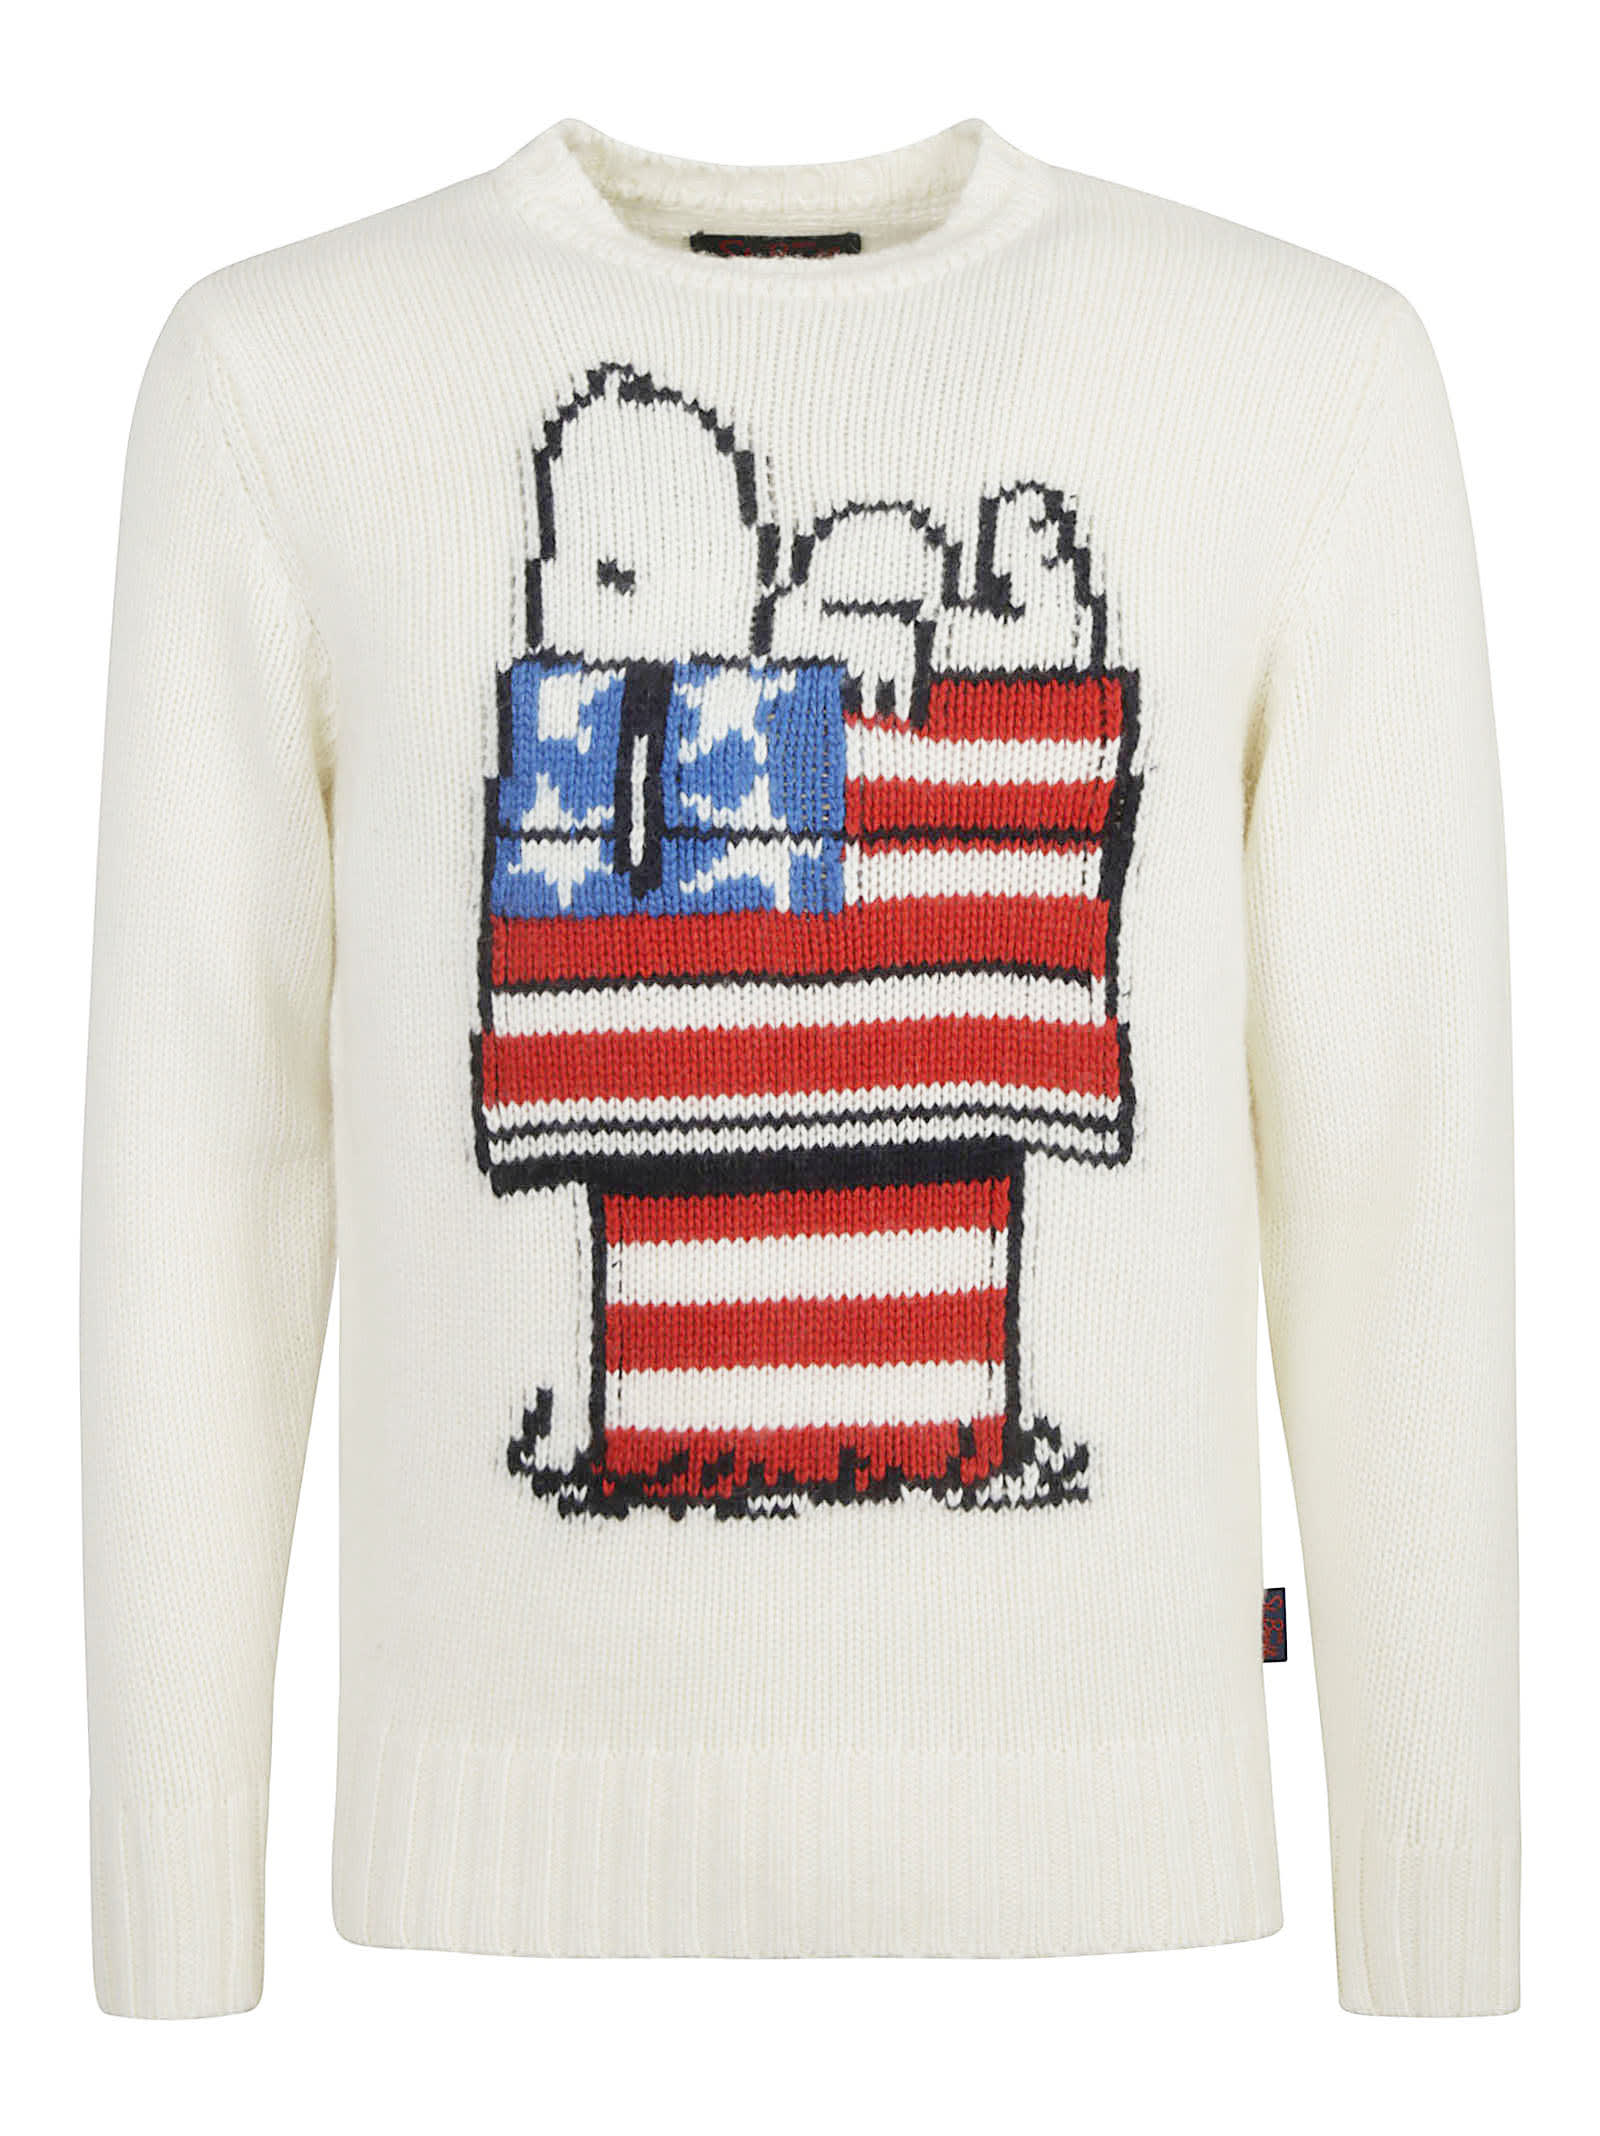 MC2 Saint Barth Snoopy Embroidered Knit Sweater